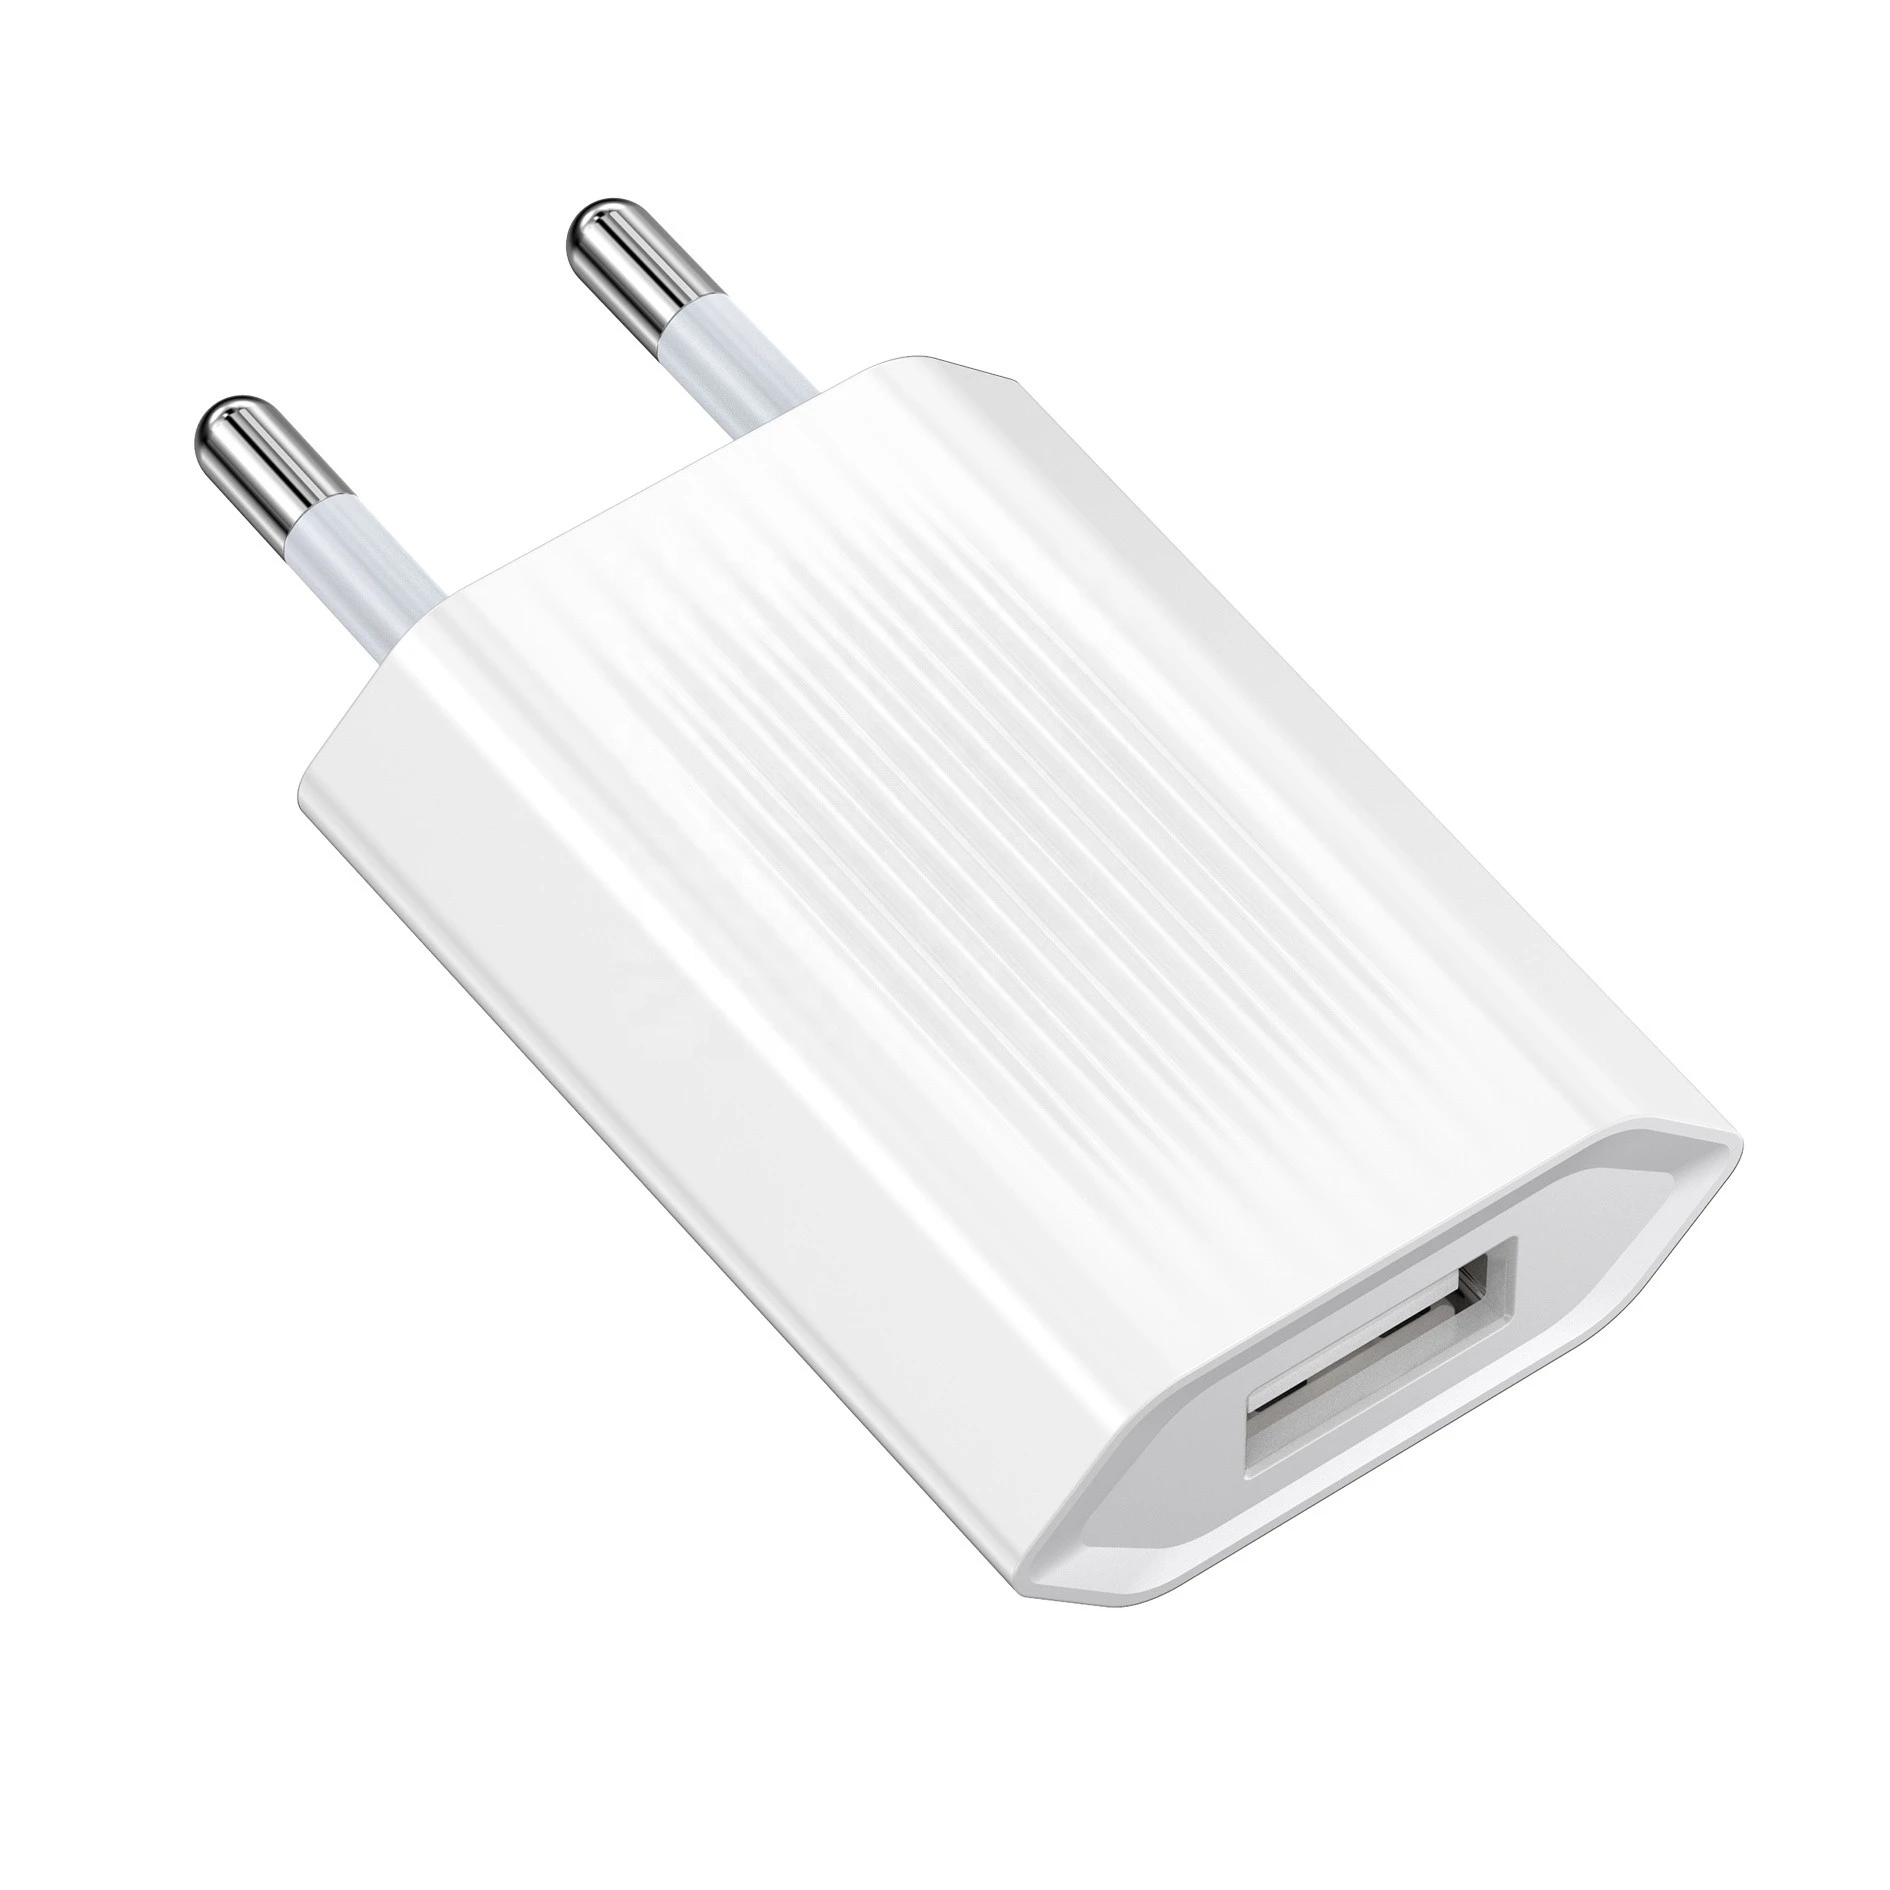 CE certificate EMC LVD EU US Cell Phone USB wall Charger Adapter 5V 1A 5W Small USB Home mobile Phone Wall Charger